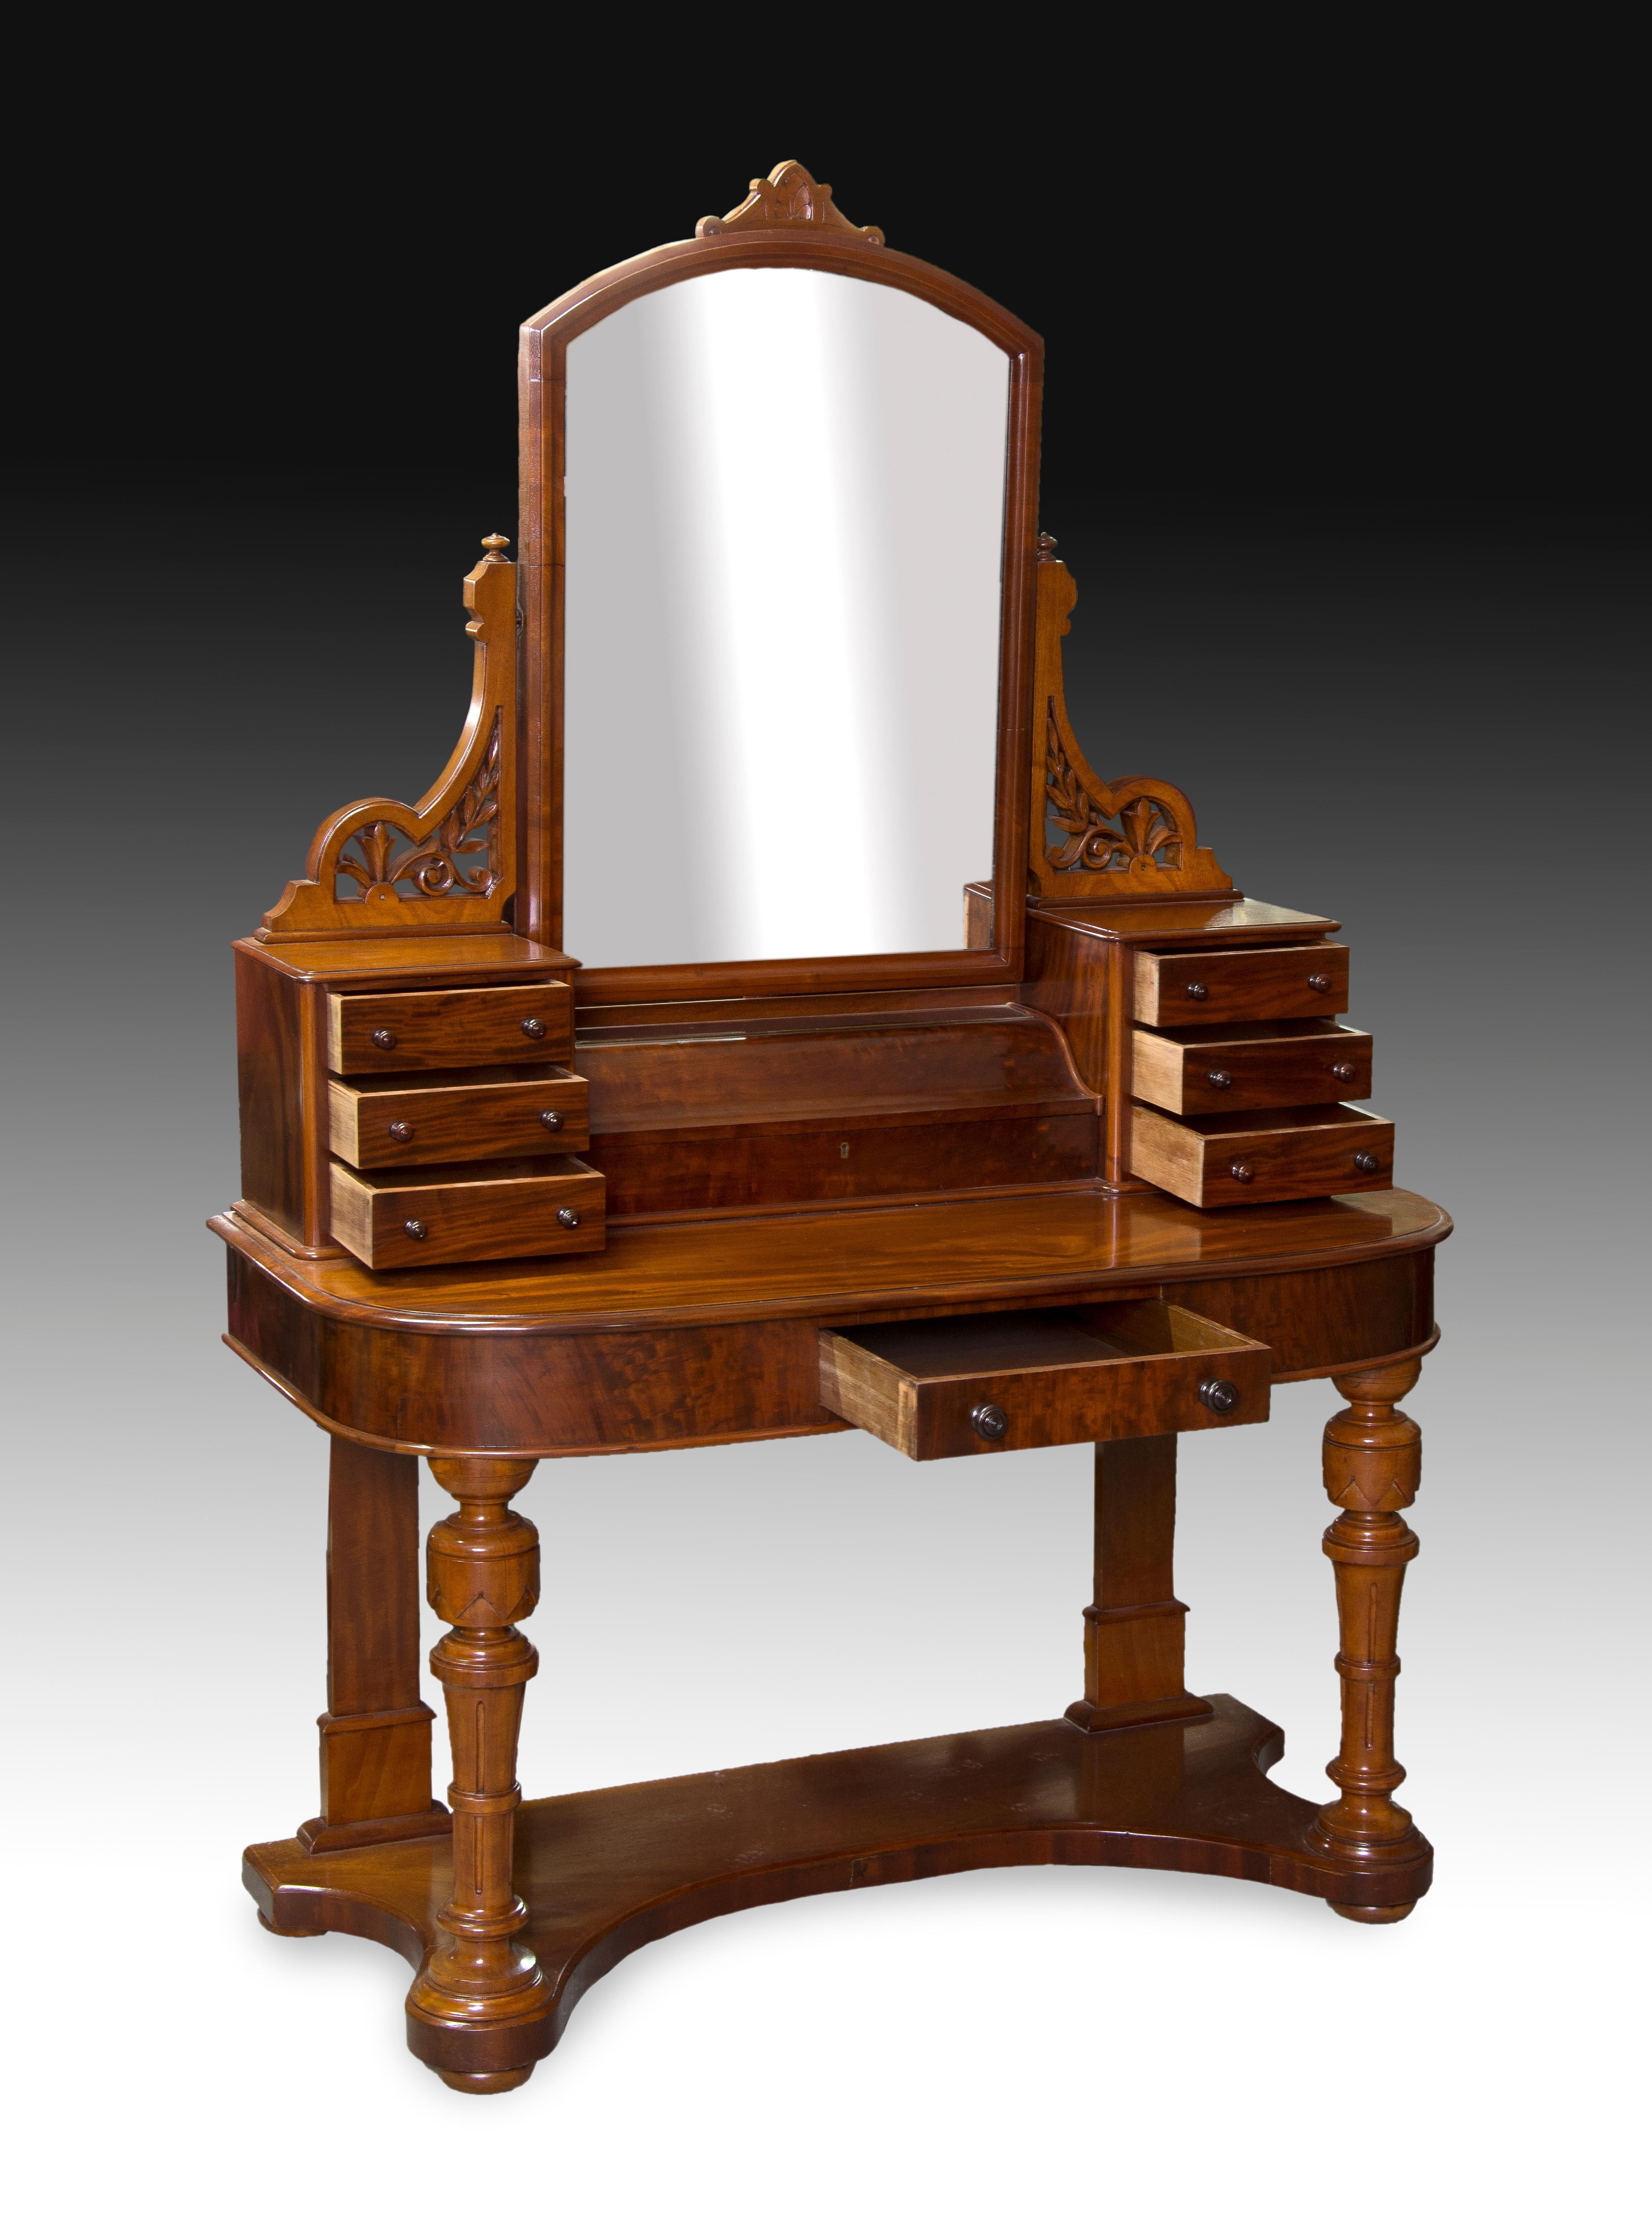 Vanity unit made of mahogany carved wood with the front legs turned as clusters topped by vase-shaped pieces, drawer on the front and a recessed upper body with three drawers on each side and a space closed to the center, under the rectangular